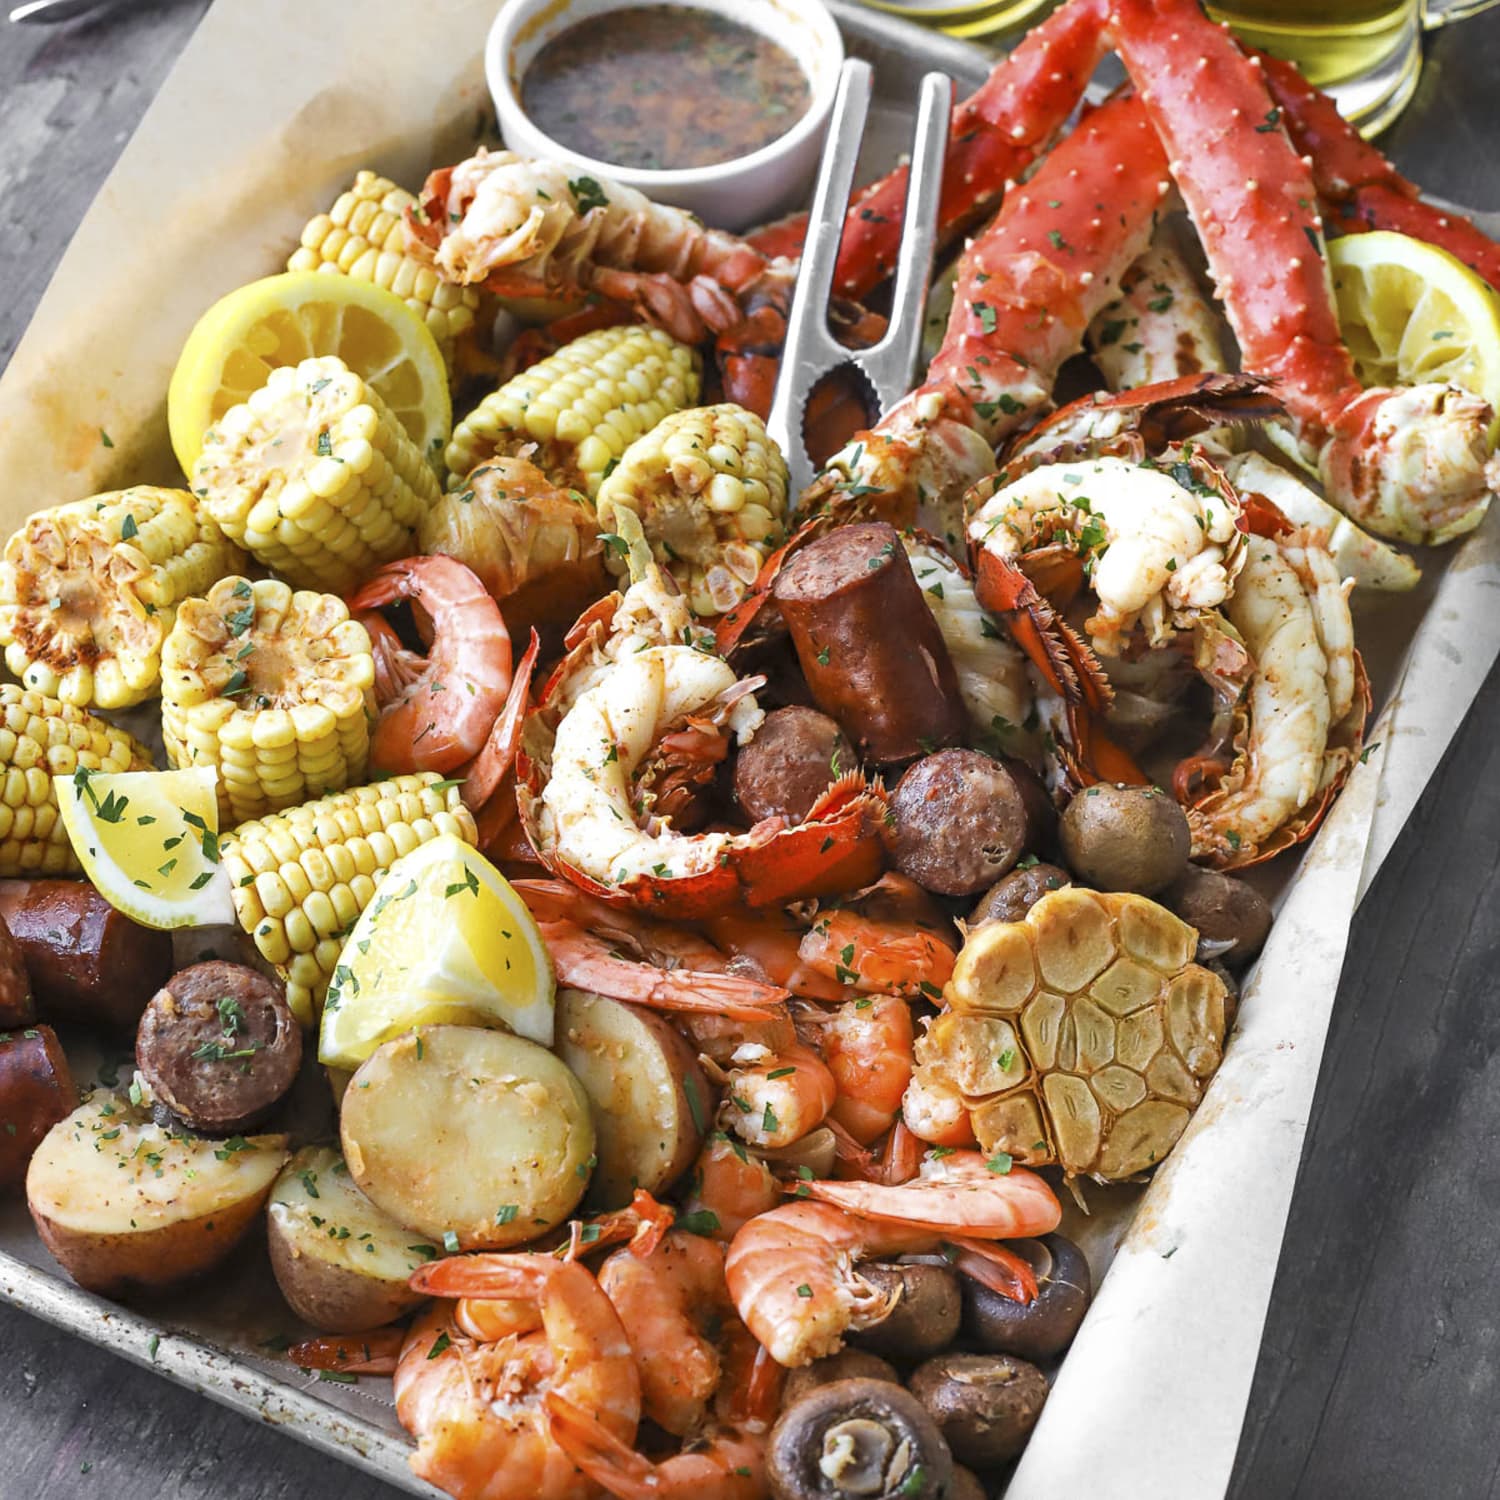 Seafood Boil Recipe (With Buttery Herb Dipping Sauce)